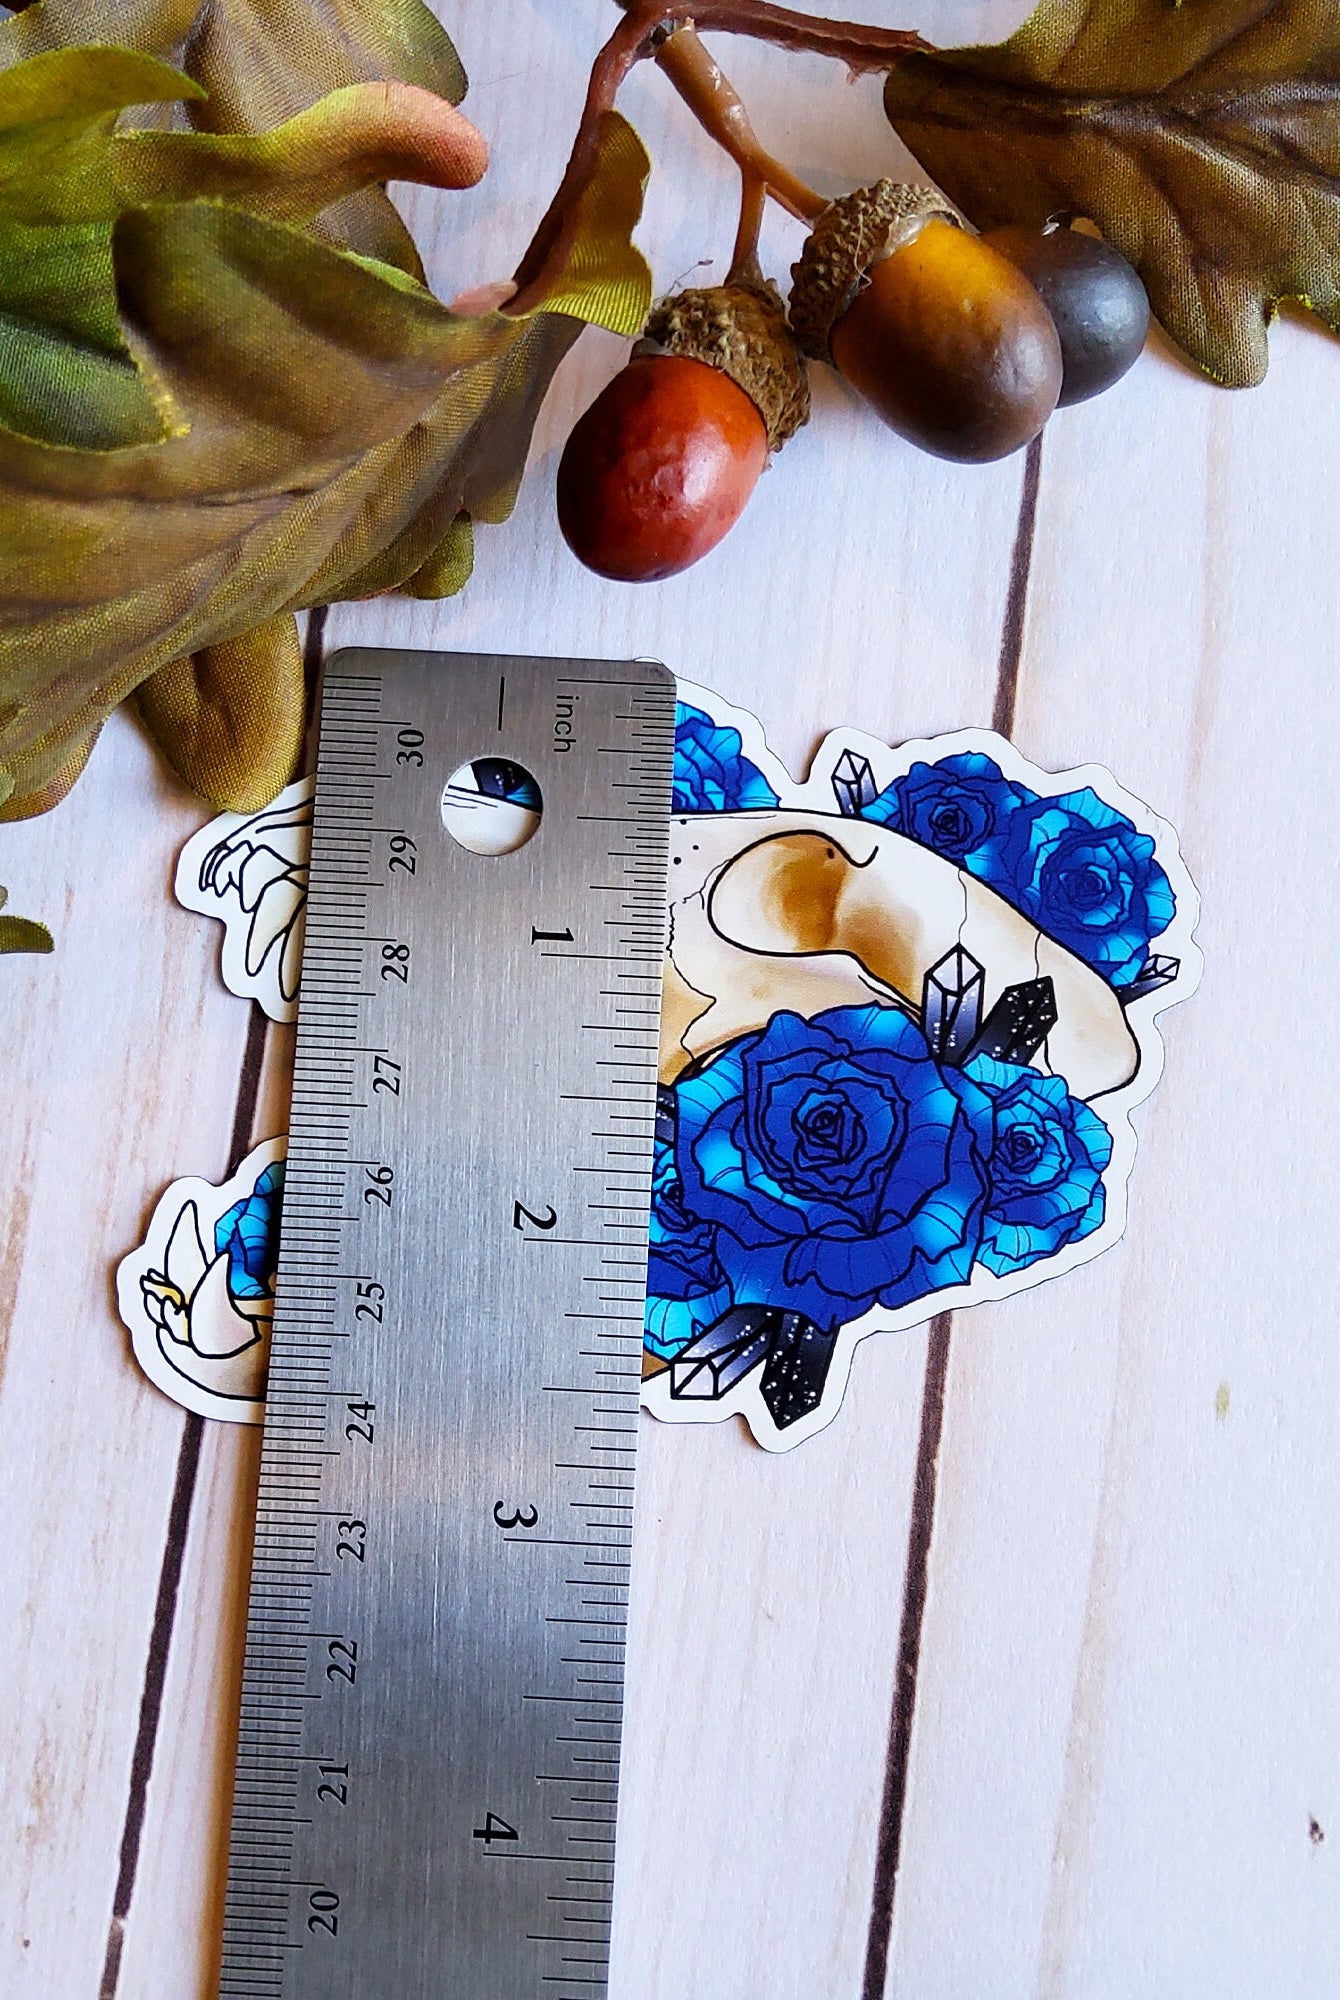 MAGNET: Wolf Skull and Blue Roses Decorative , Wolf Skull Magnet , Skull and Roses Magnet , Skull Magnet , Skull Art Decorative Magnet